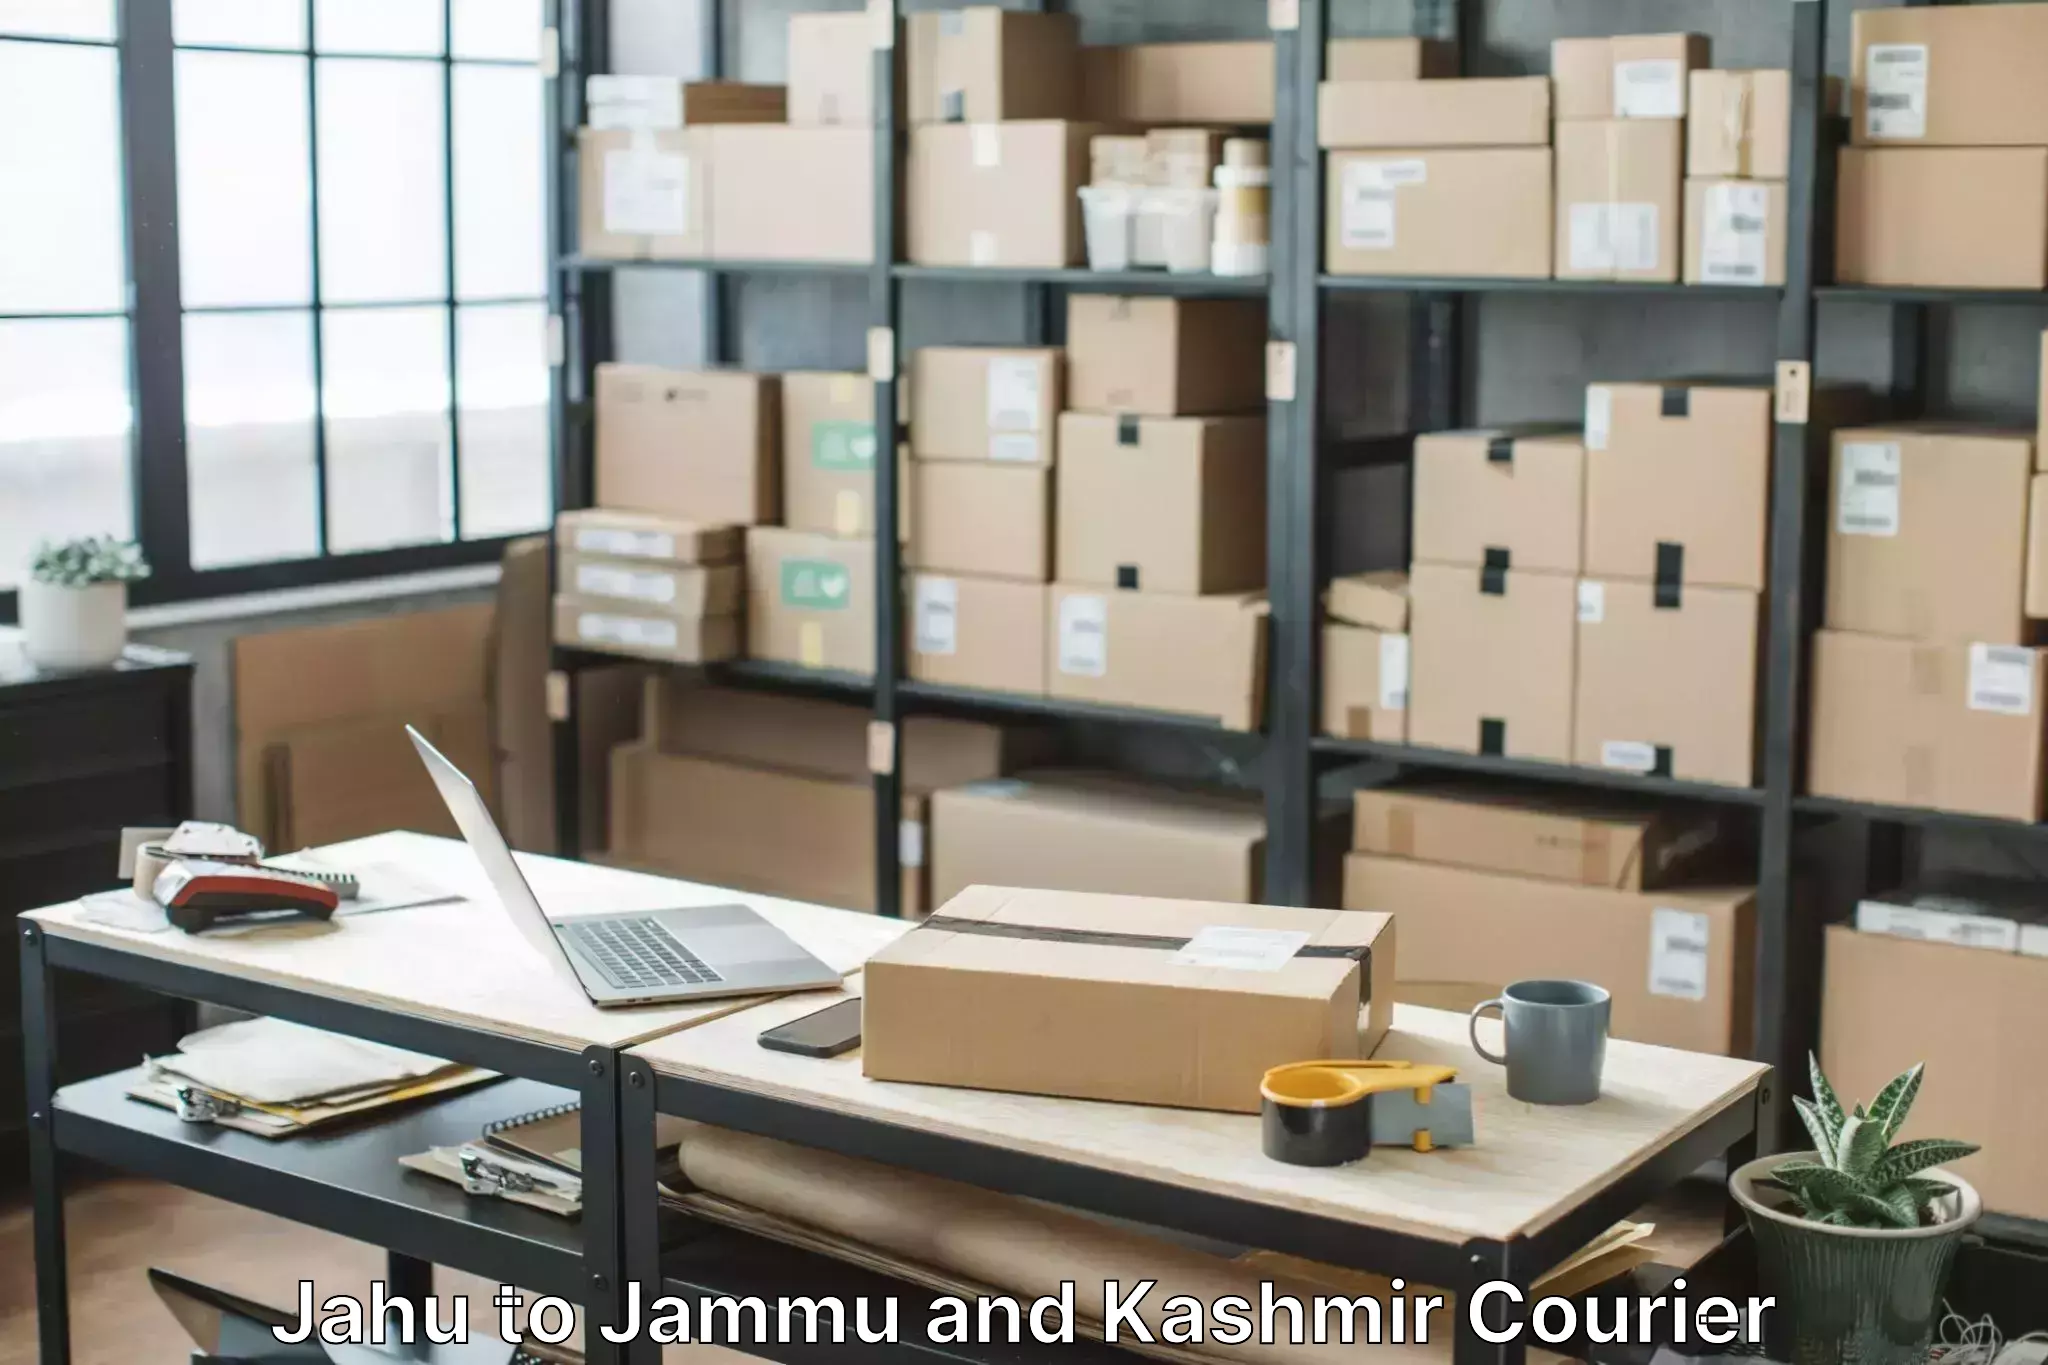 Reliable furniture movers Jahu to Jammu and Kashmir